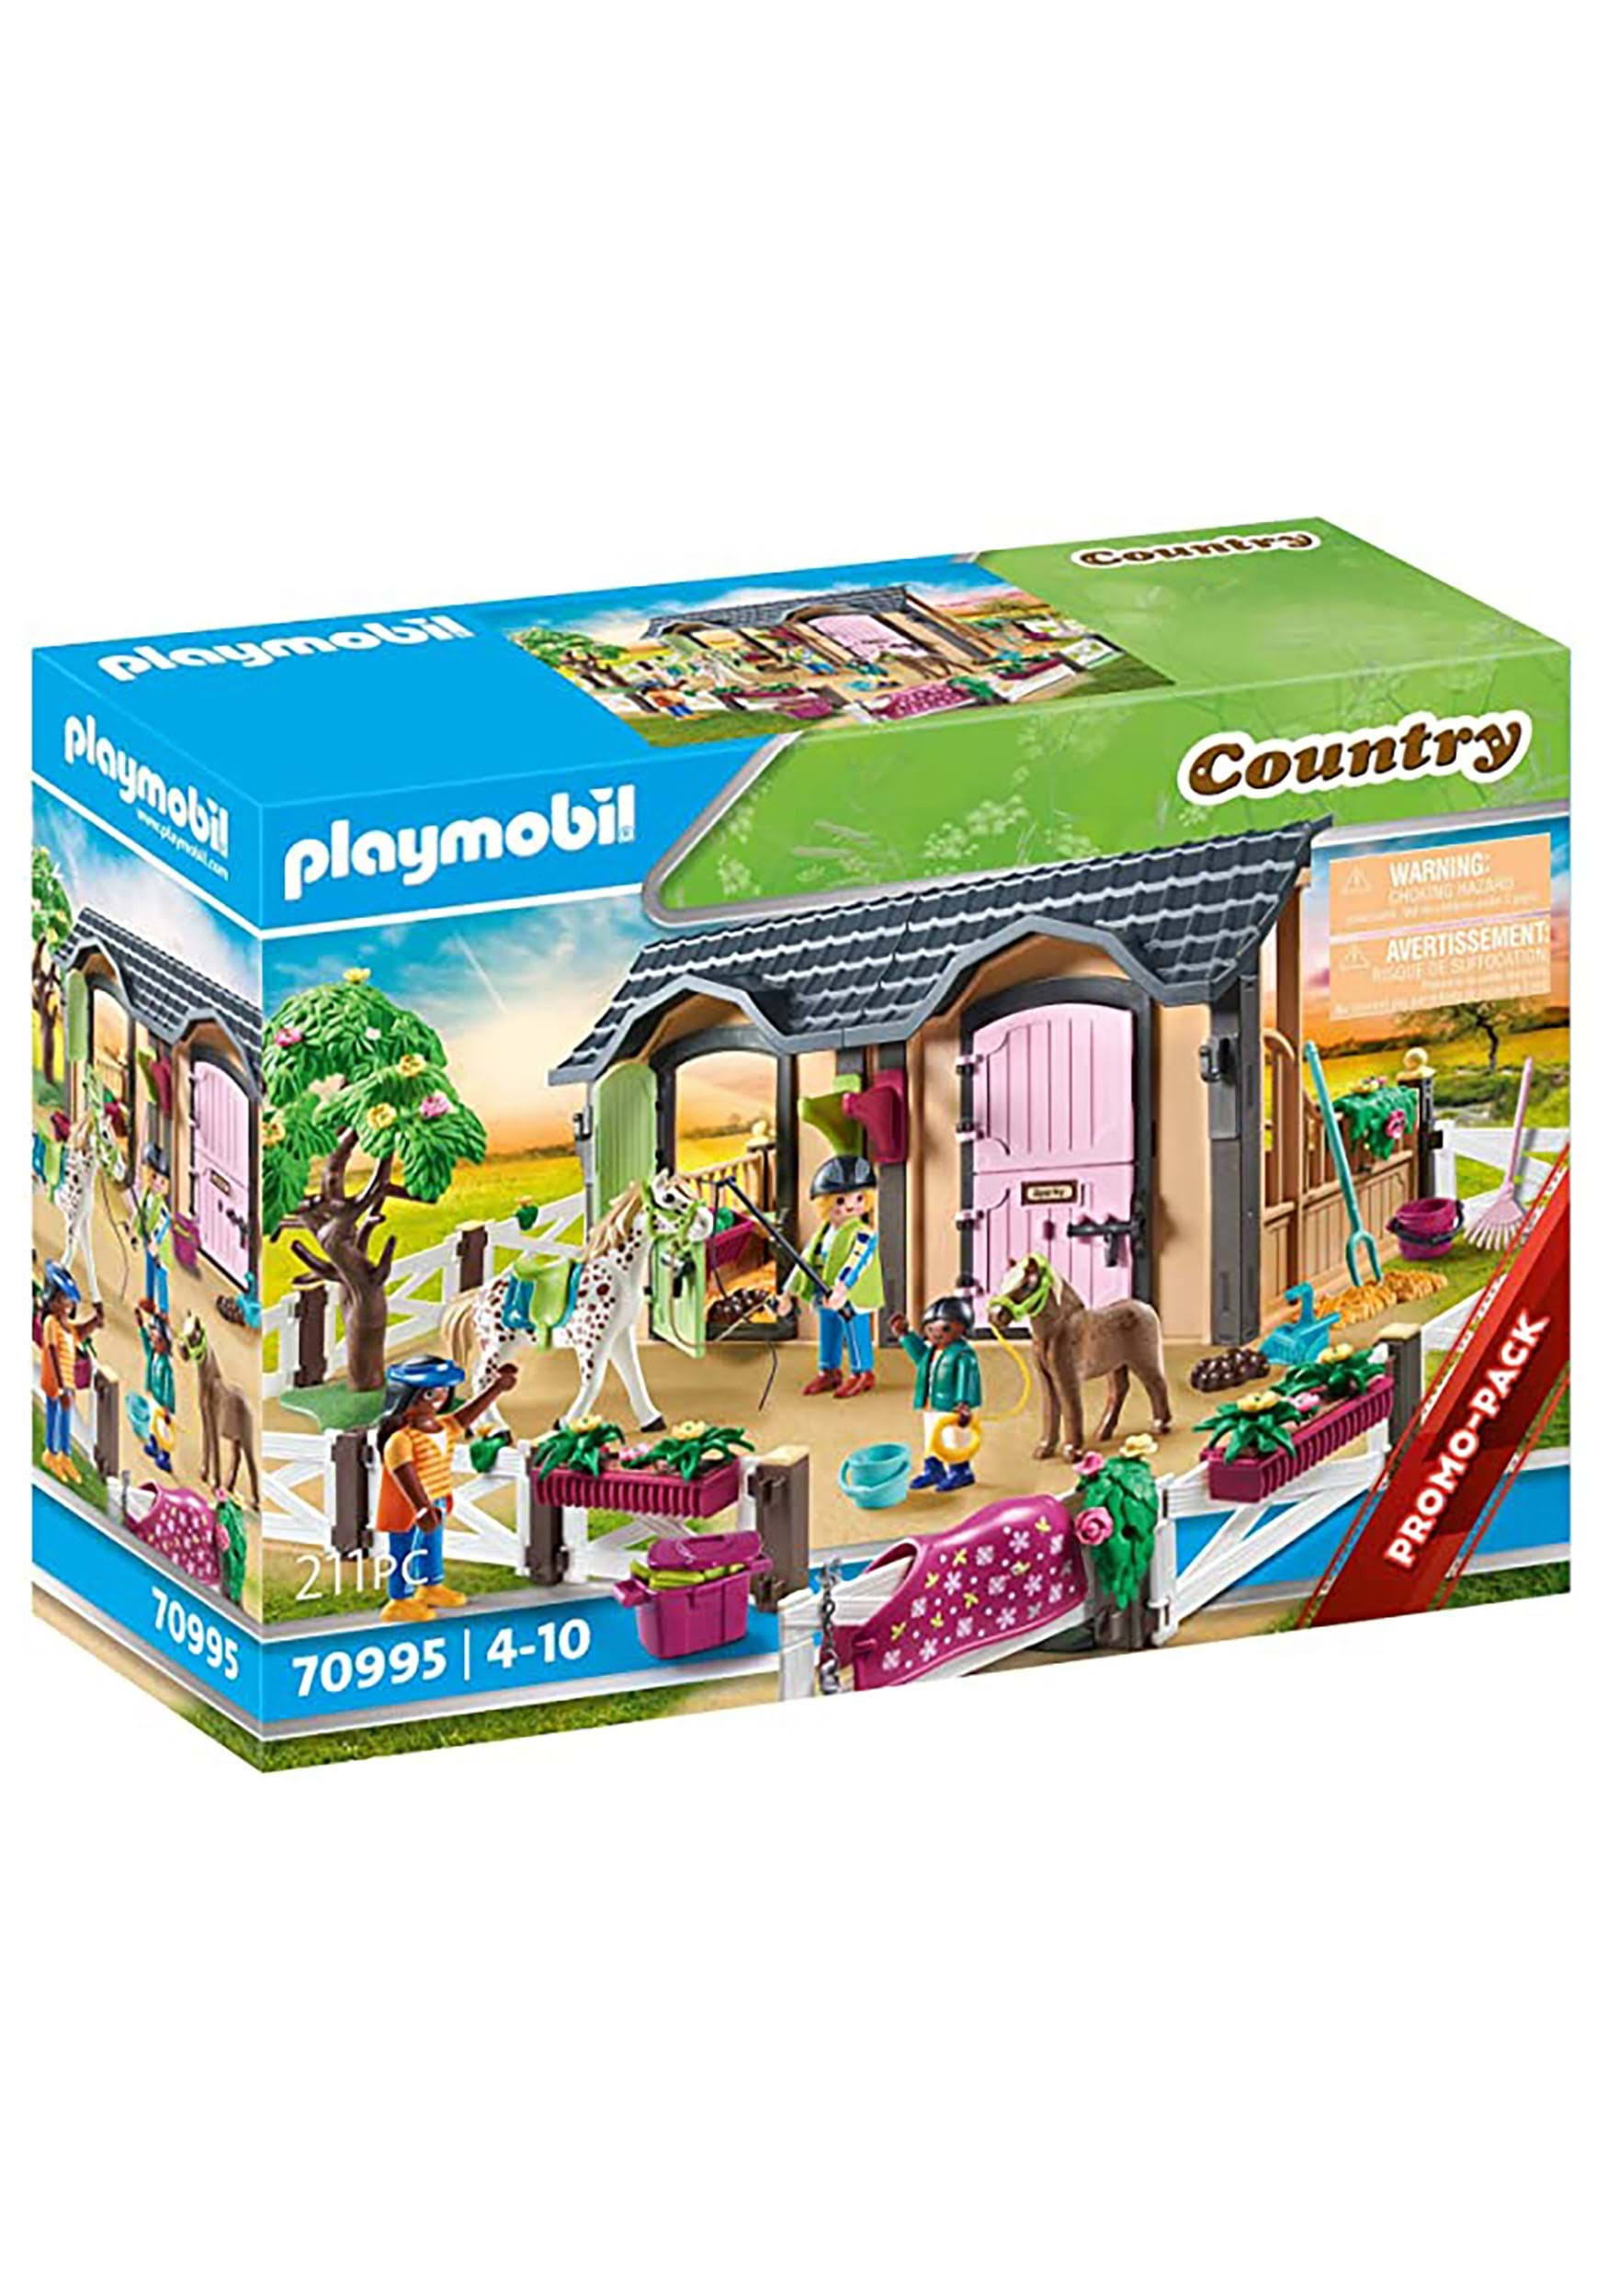 Playmobil Country 70995 Horseback Riding Lessons Playset